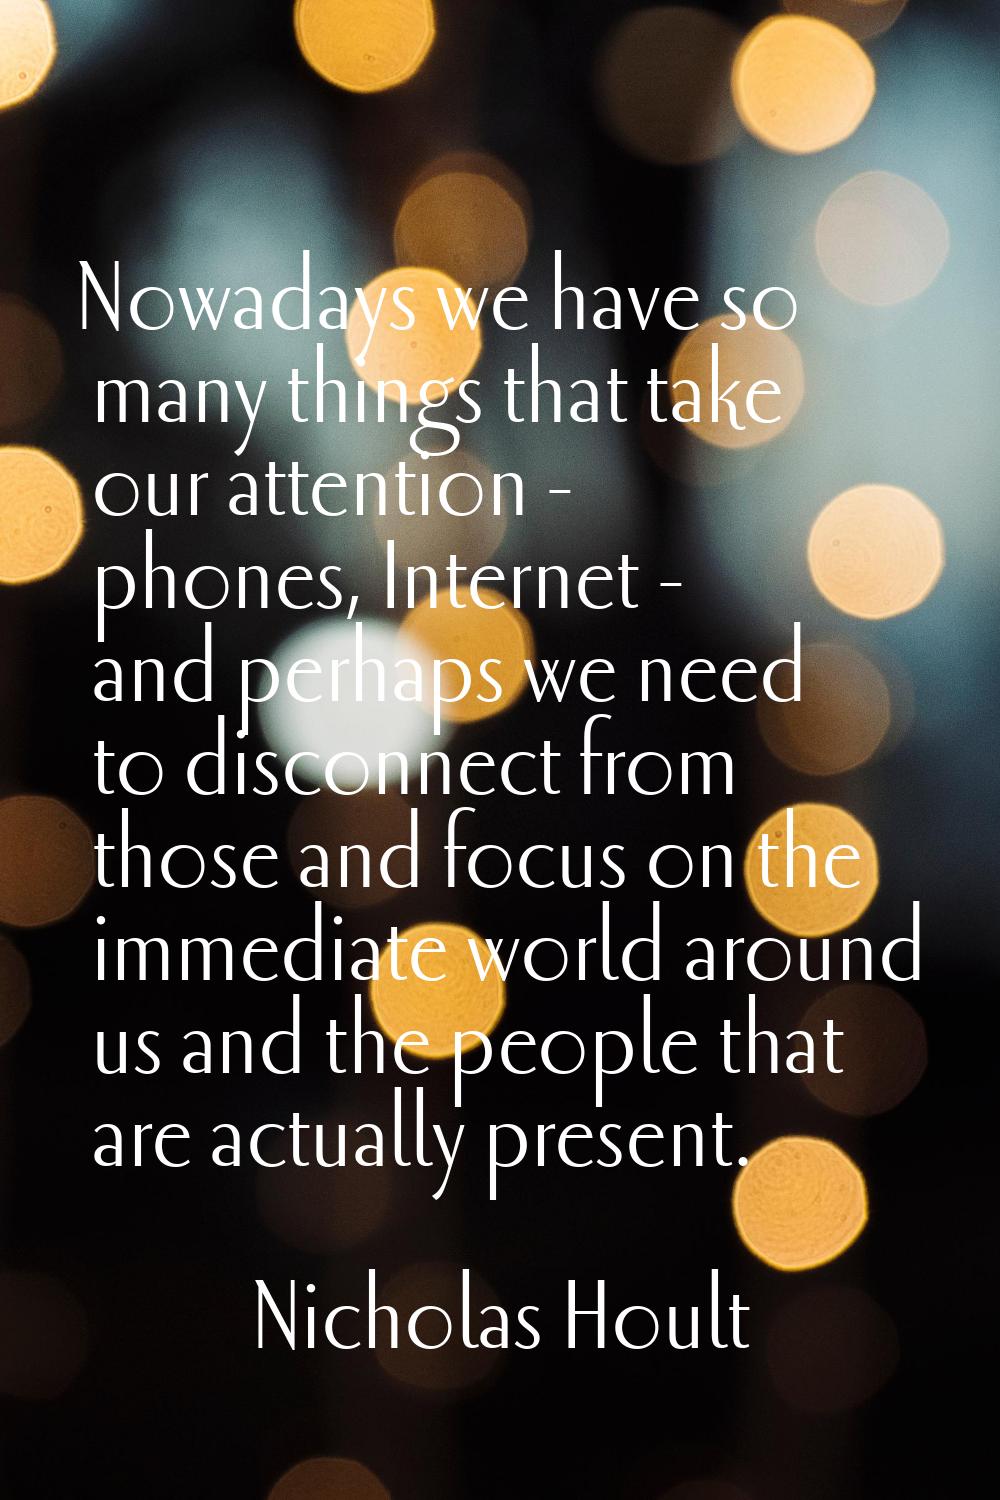 Nowadays we have so many things that take our attention - phones, Internet - and perhaps we need to